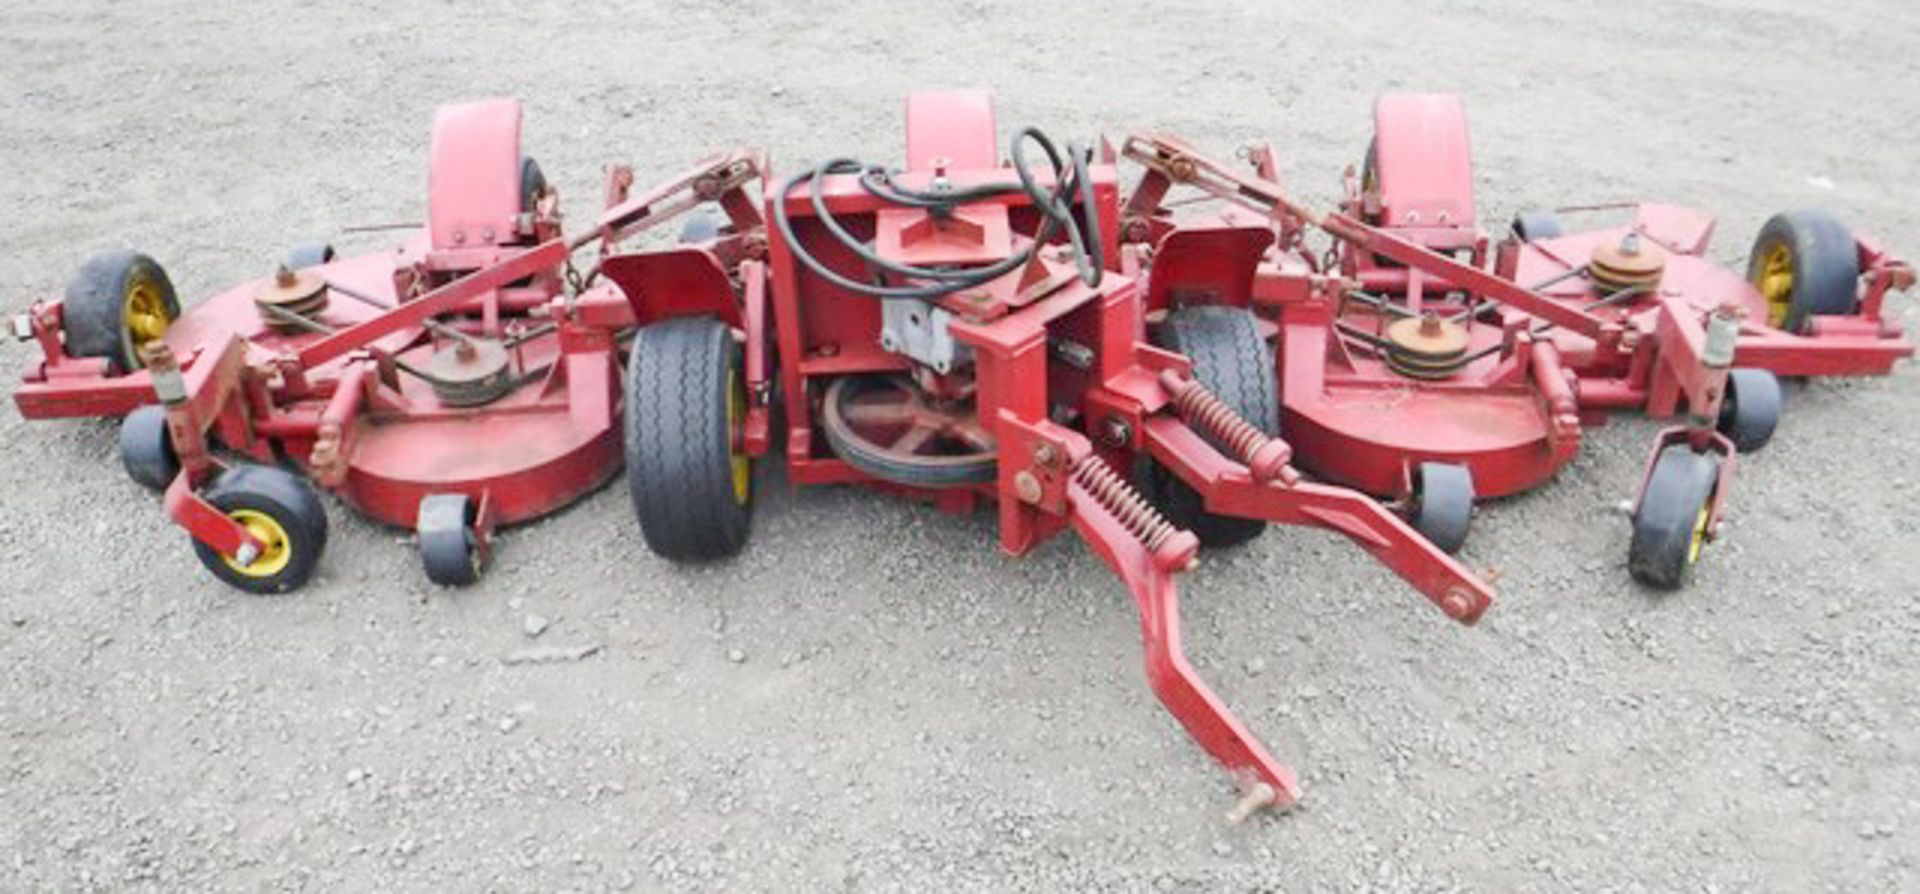 LASTEC ARTICULATOR 7 decked PTO driven grass cutter with hydraulic lift. - Image 4 of 9